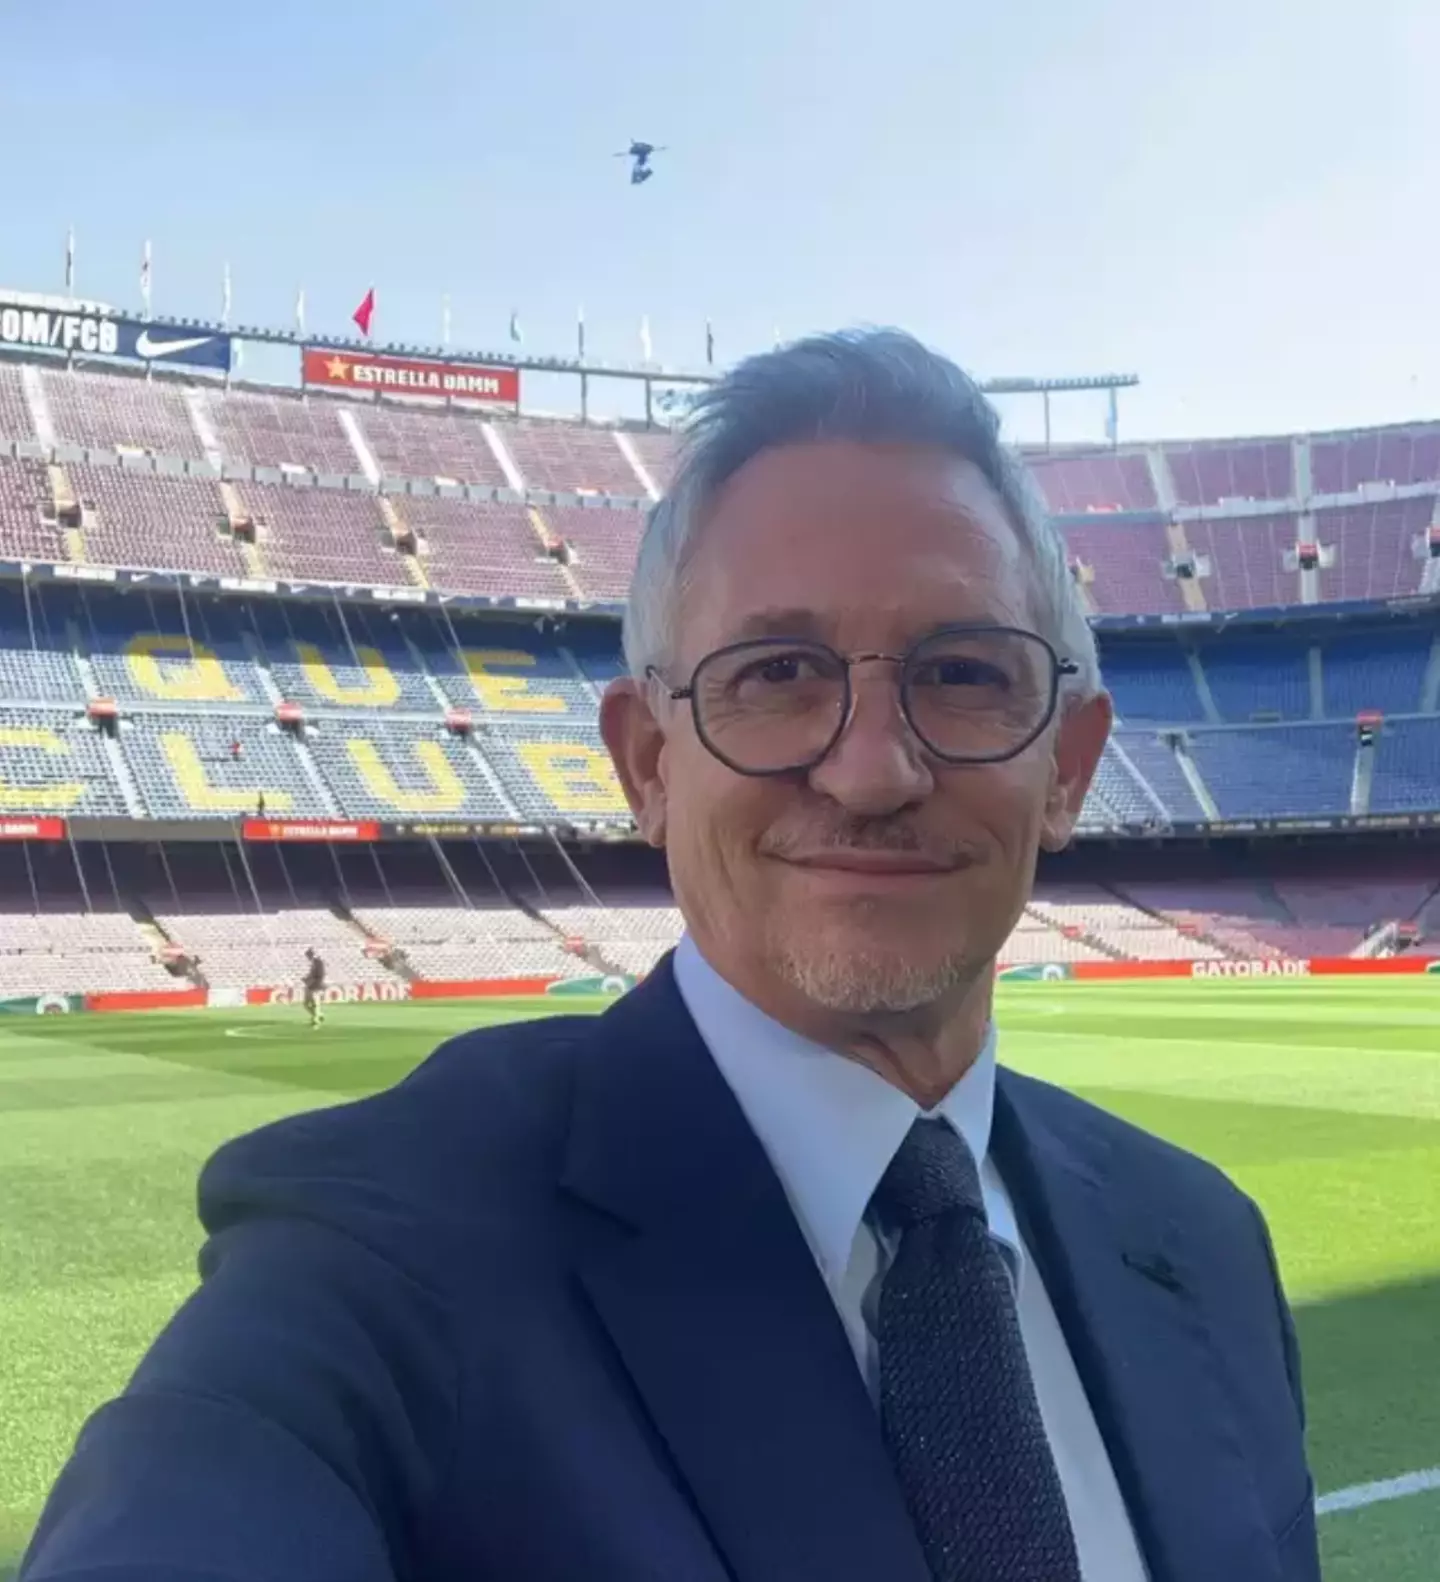 Gary Lineker was allowed to return to the BBC on Monday (13 March).